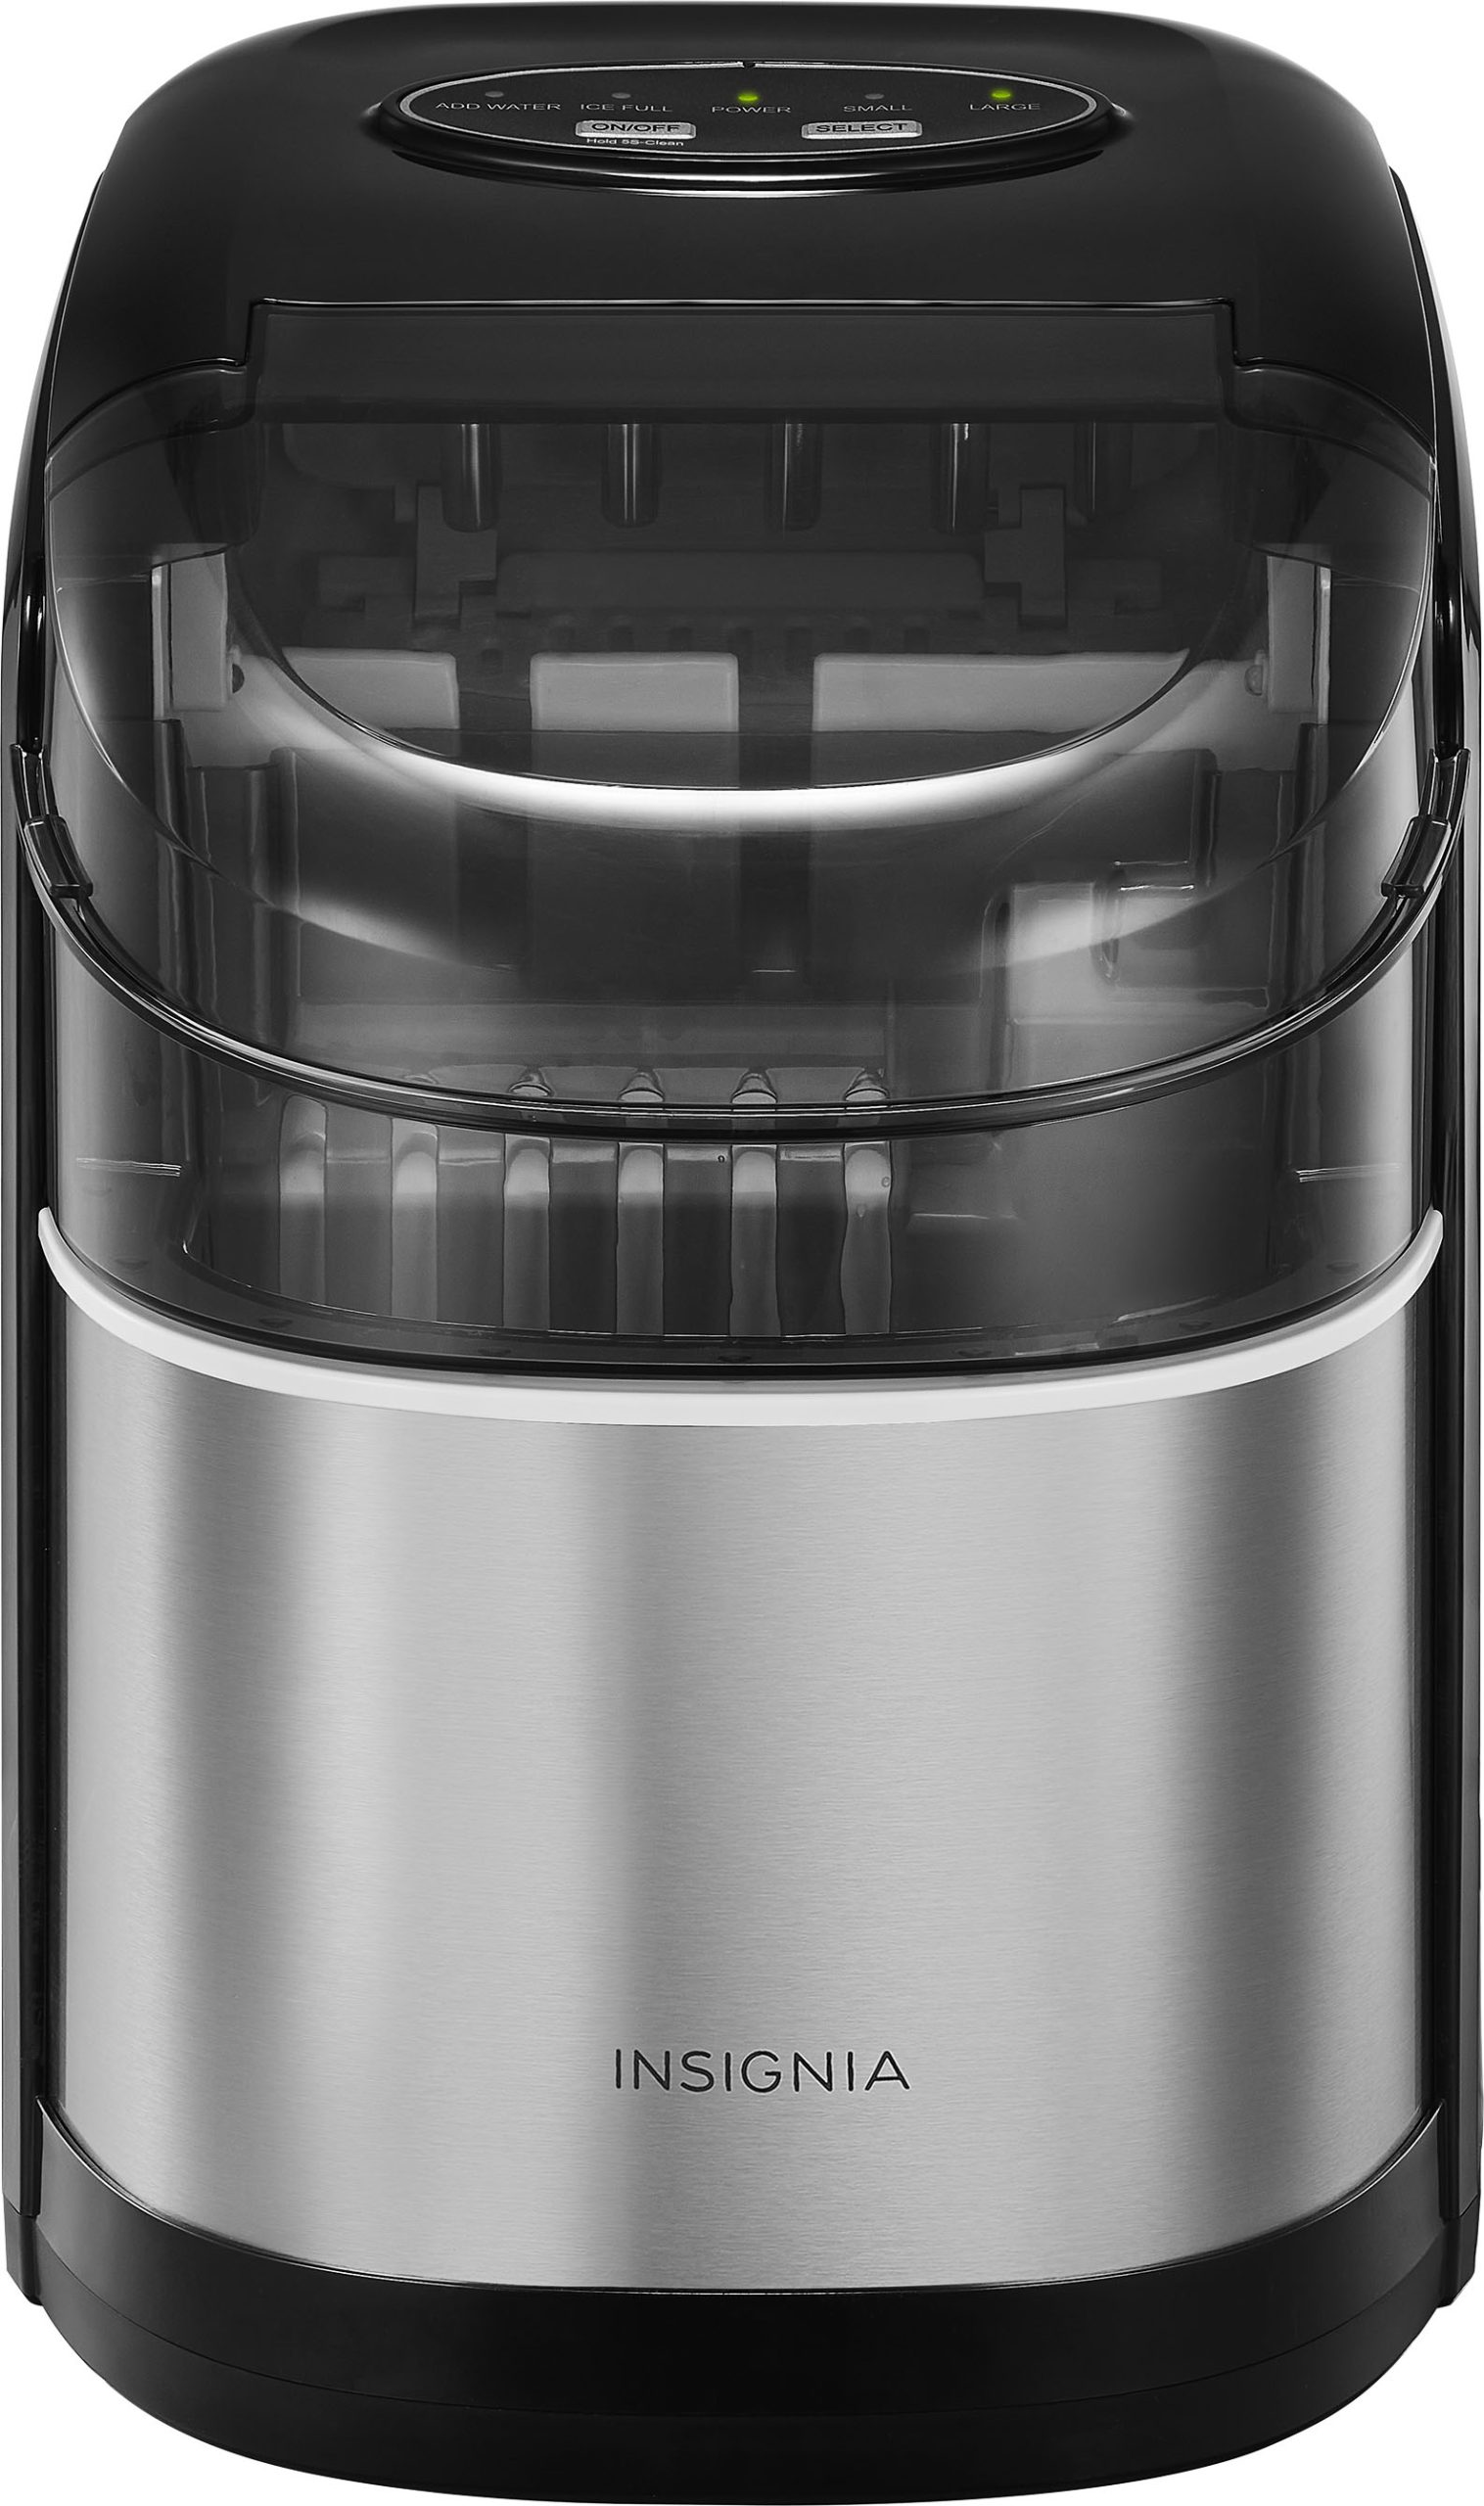 Insignia™ – Portable Icemaker 33 lb. With Auto Shut-Off – Stainless steel – Just $119.99 at Best Buy